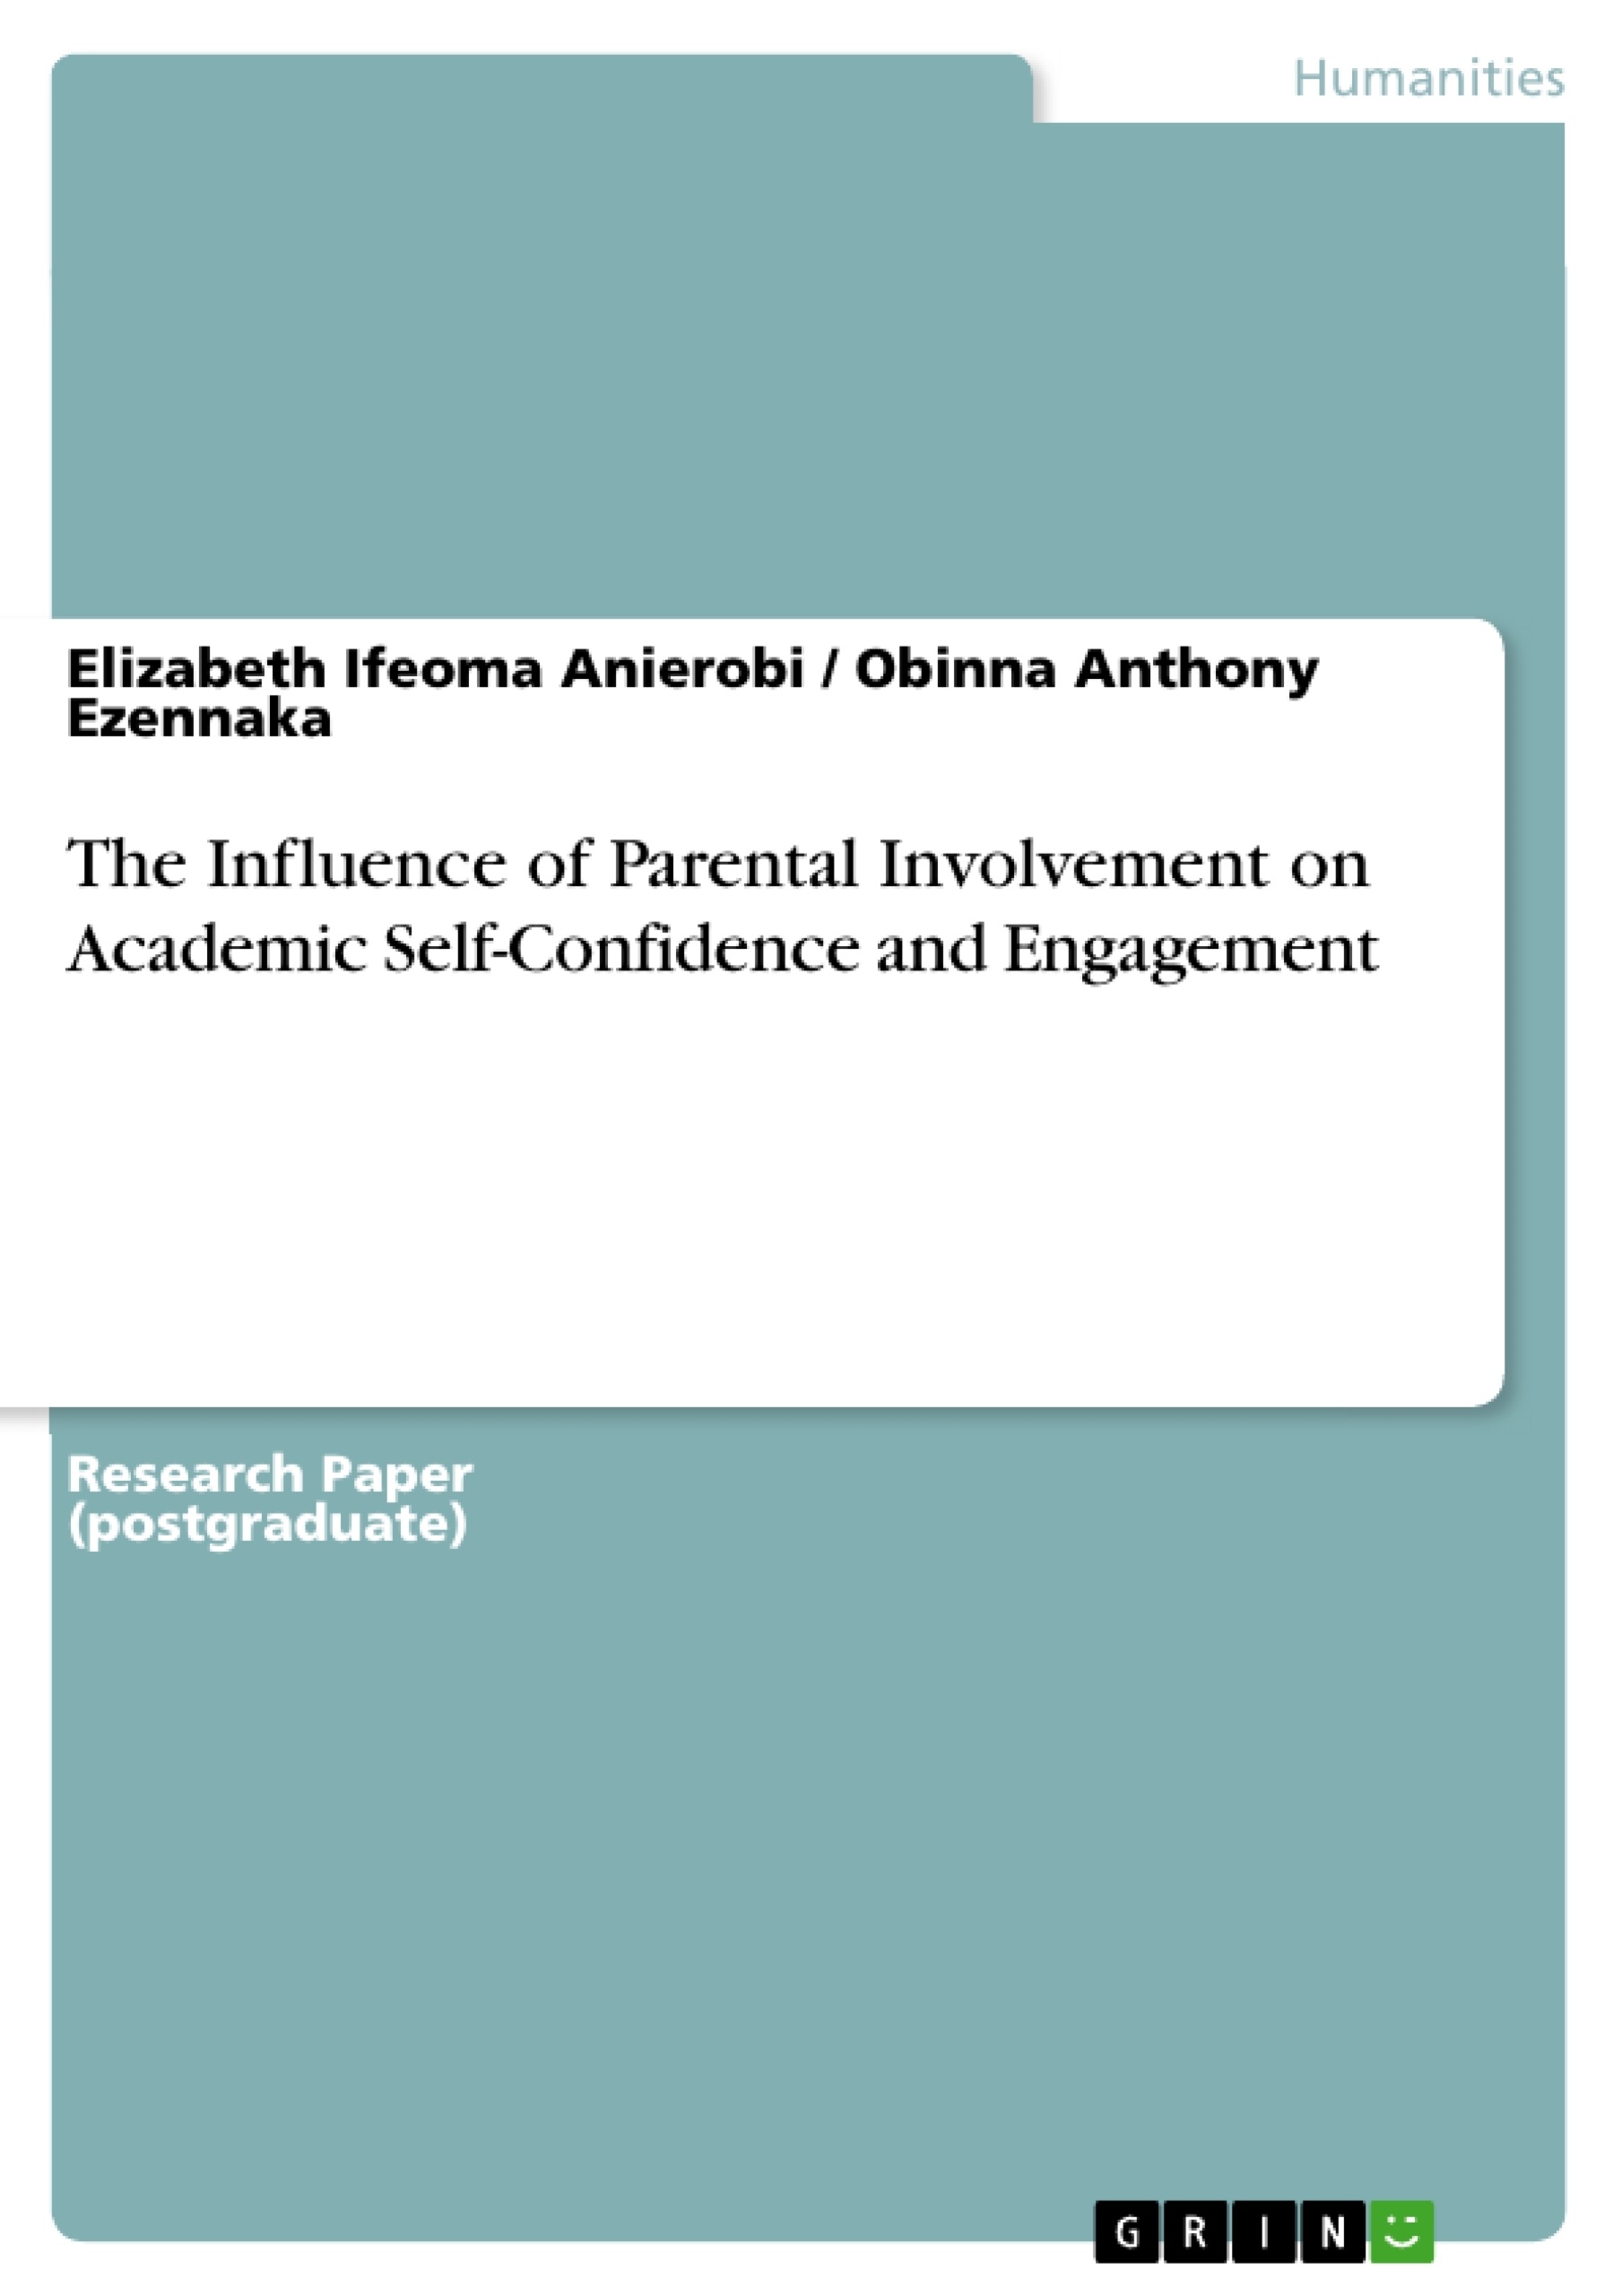 Title: The Influence of Parental Involvement on Academic Self-Confidence and Engagement